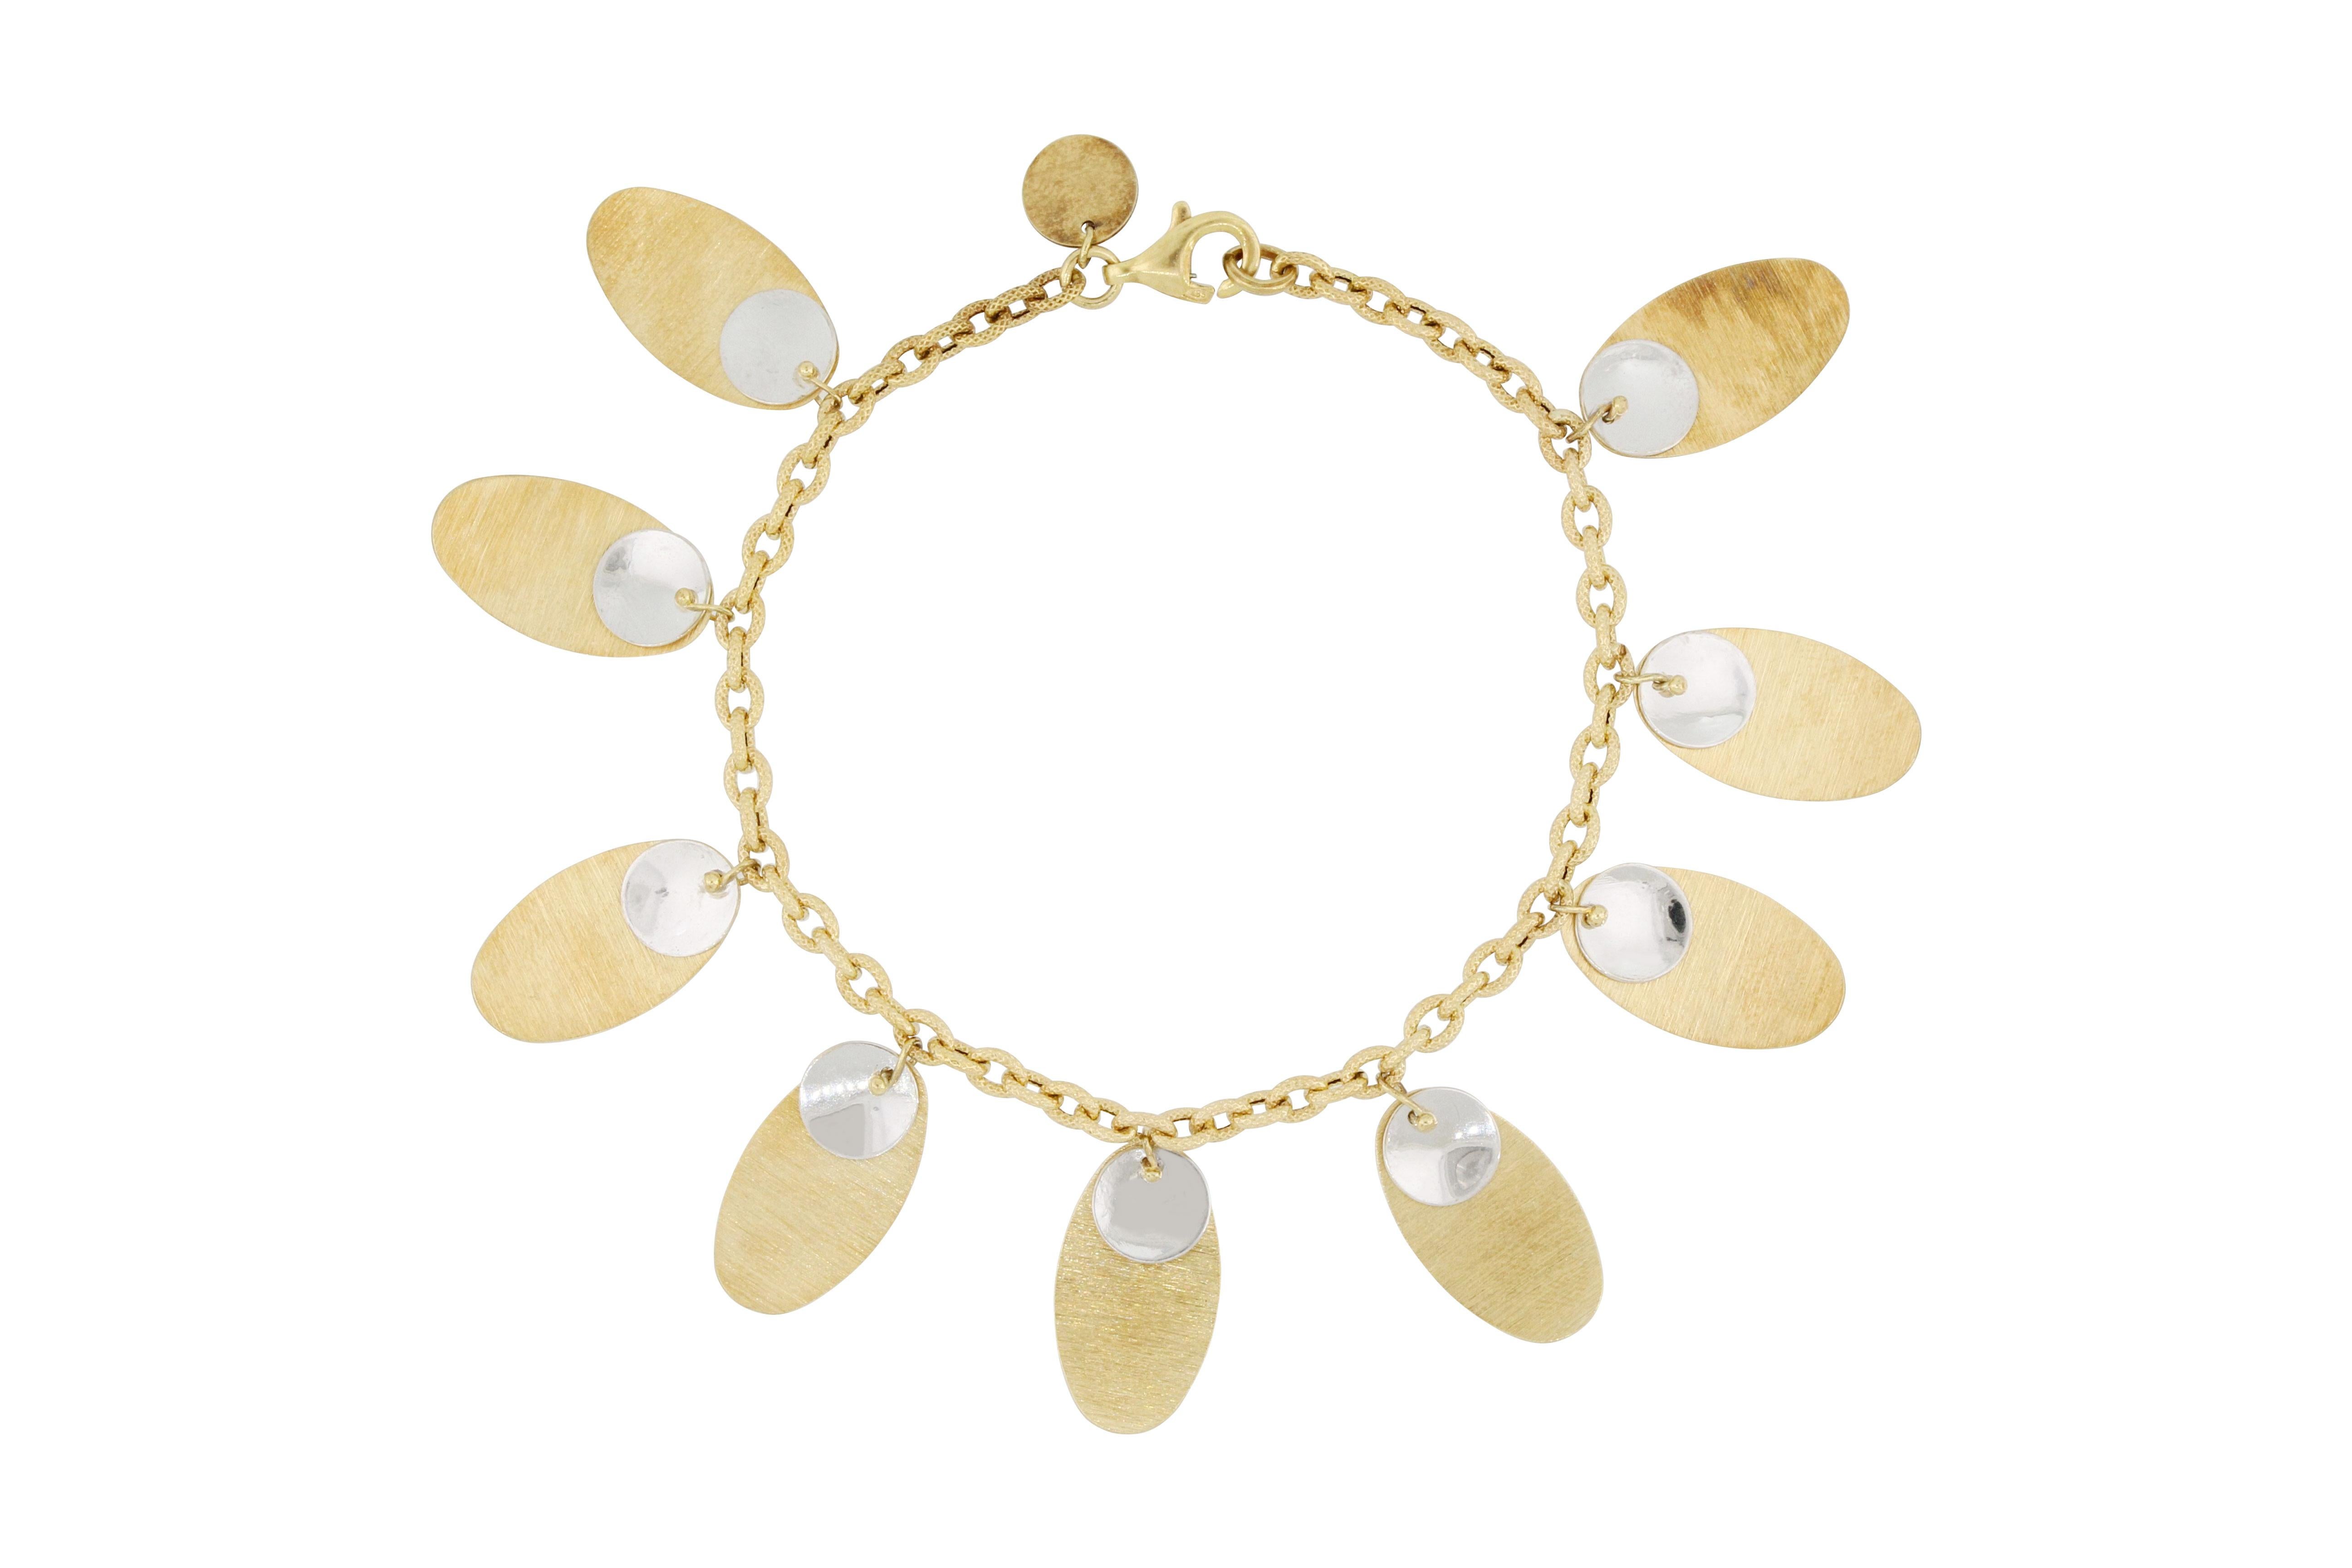 A very nice 18K gold bracelet designed and made in Italy, decorated with dangling bicolour charms in oval shape, it’s stylish and trendy.
The company is renowned for its high jewellery collections with fabulous designs. Our designs reflect the